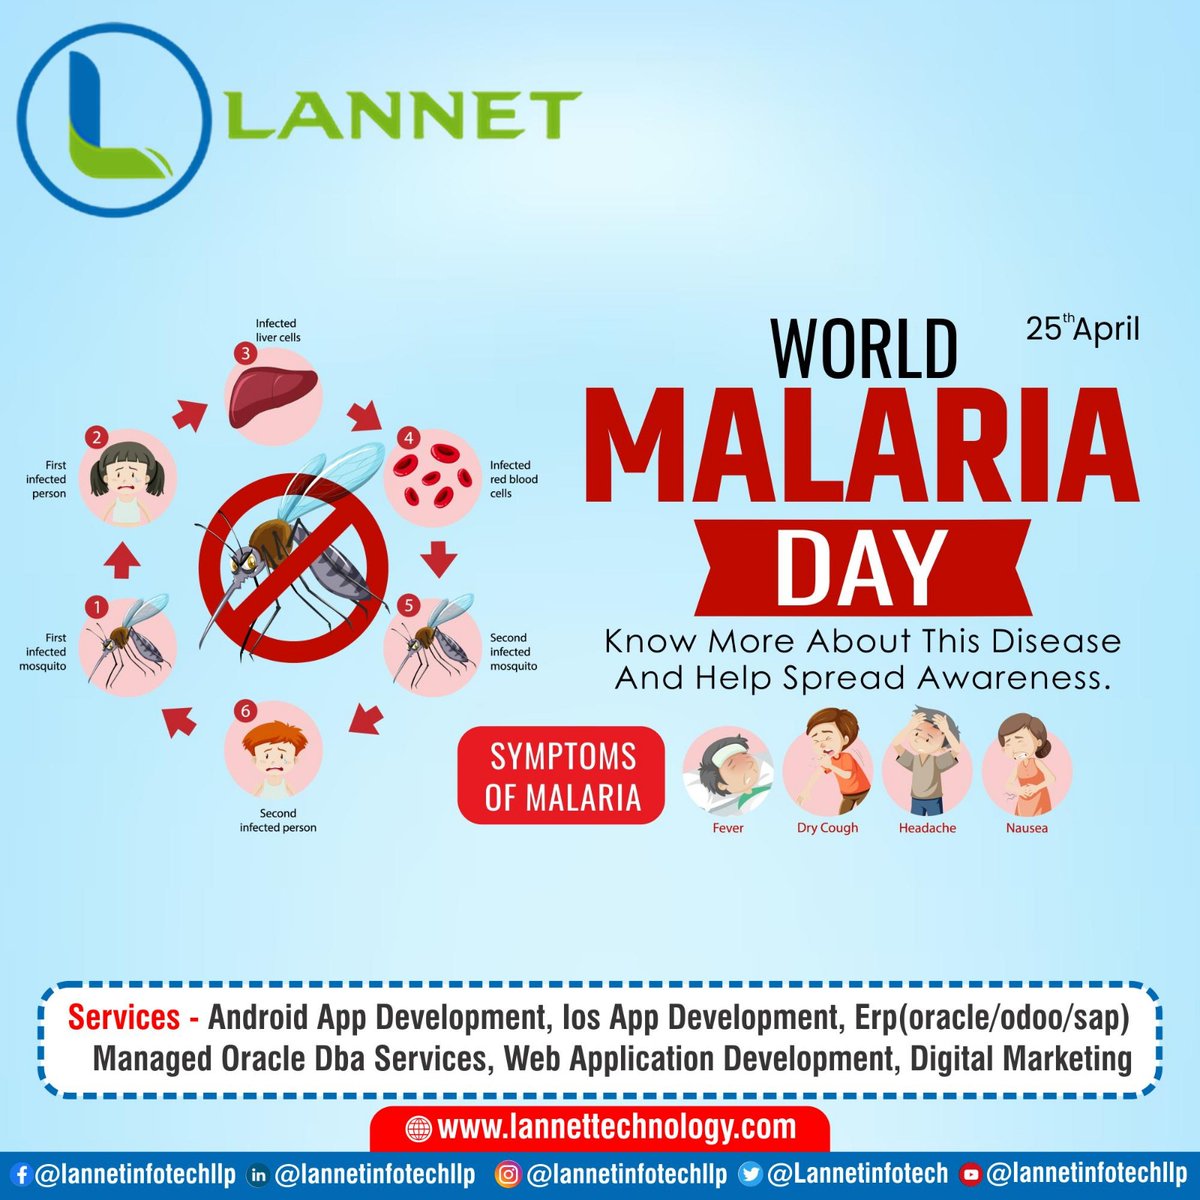 'On World Malaria Day, let's honor the frontline health workers and organizations dedicated to combating malaria and improving healthcare access in affected regions.' #HealthHeroes #MalariaElimination